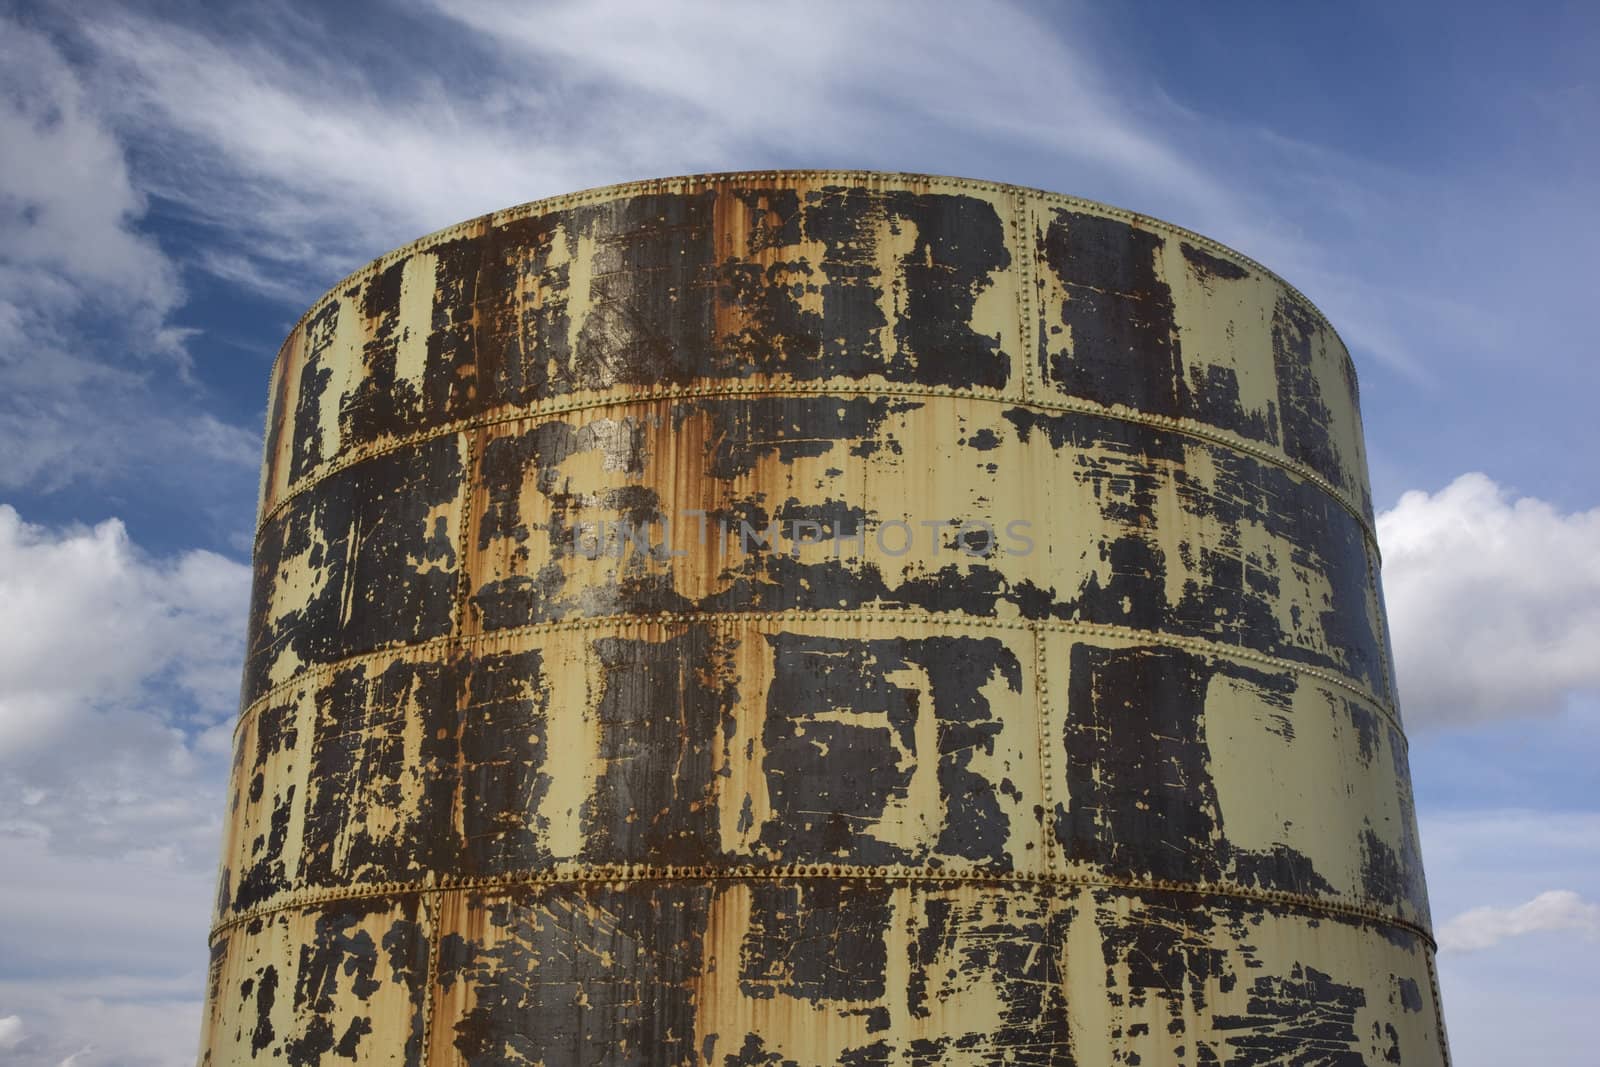 old rusty grain bin or storage tank (metal with rivets design) against partially cloudy sky